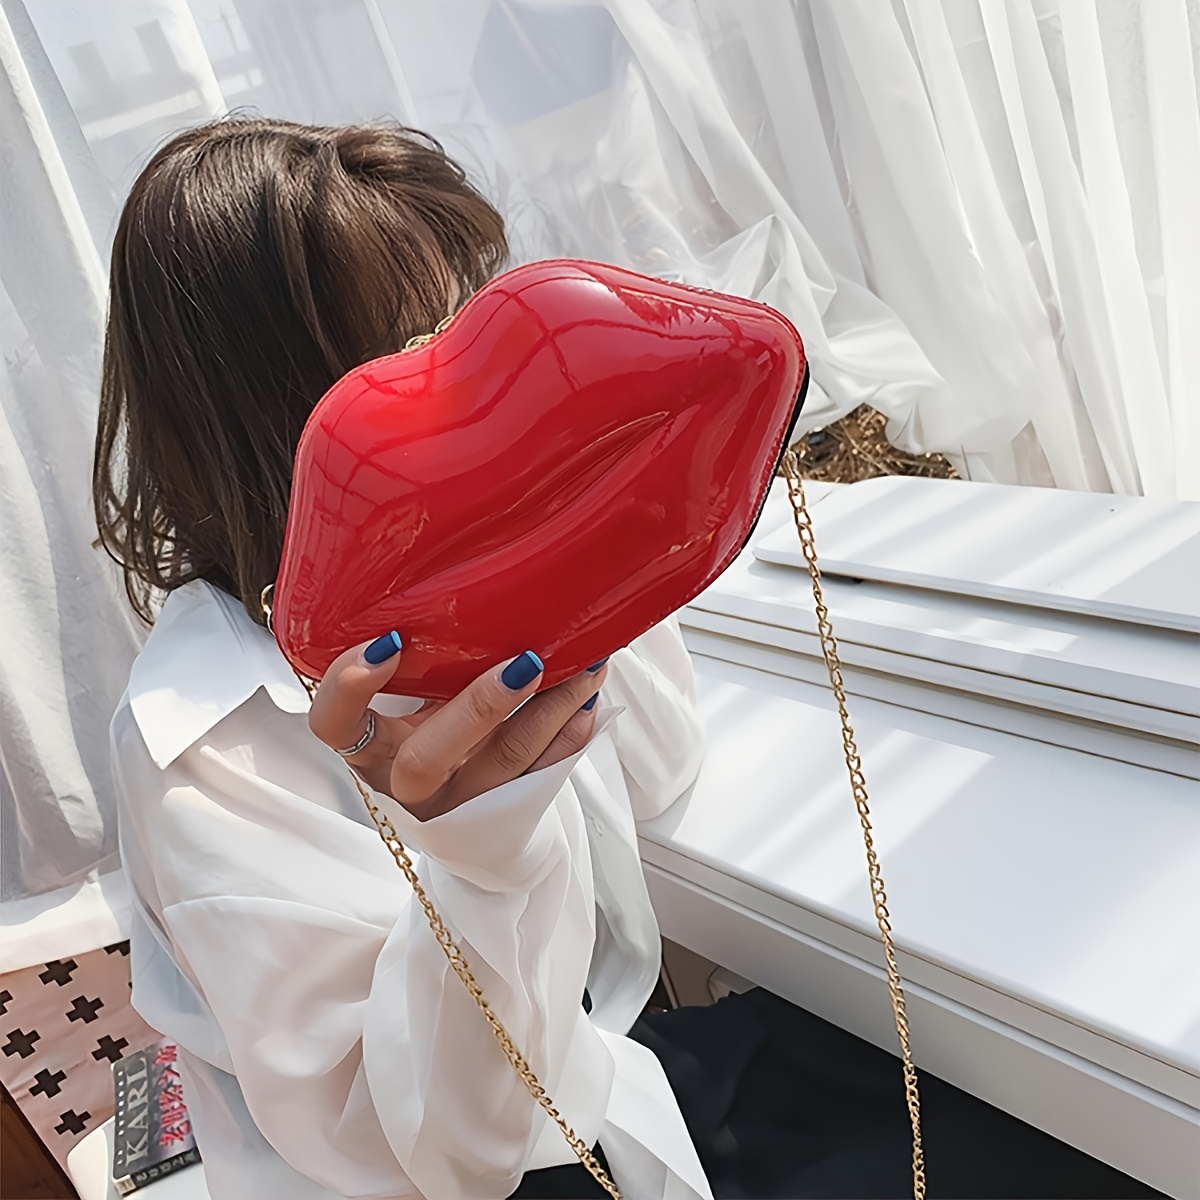 

Red Lip Shaped Unique Korean Style Glossy Shoulder & Crossbody Bag, Fashion Small Handbag With Chain Strap For Women